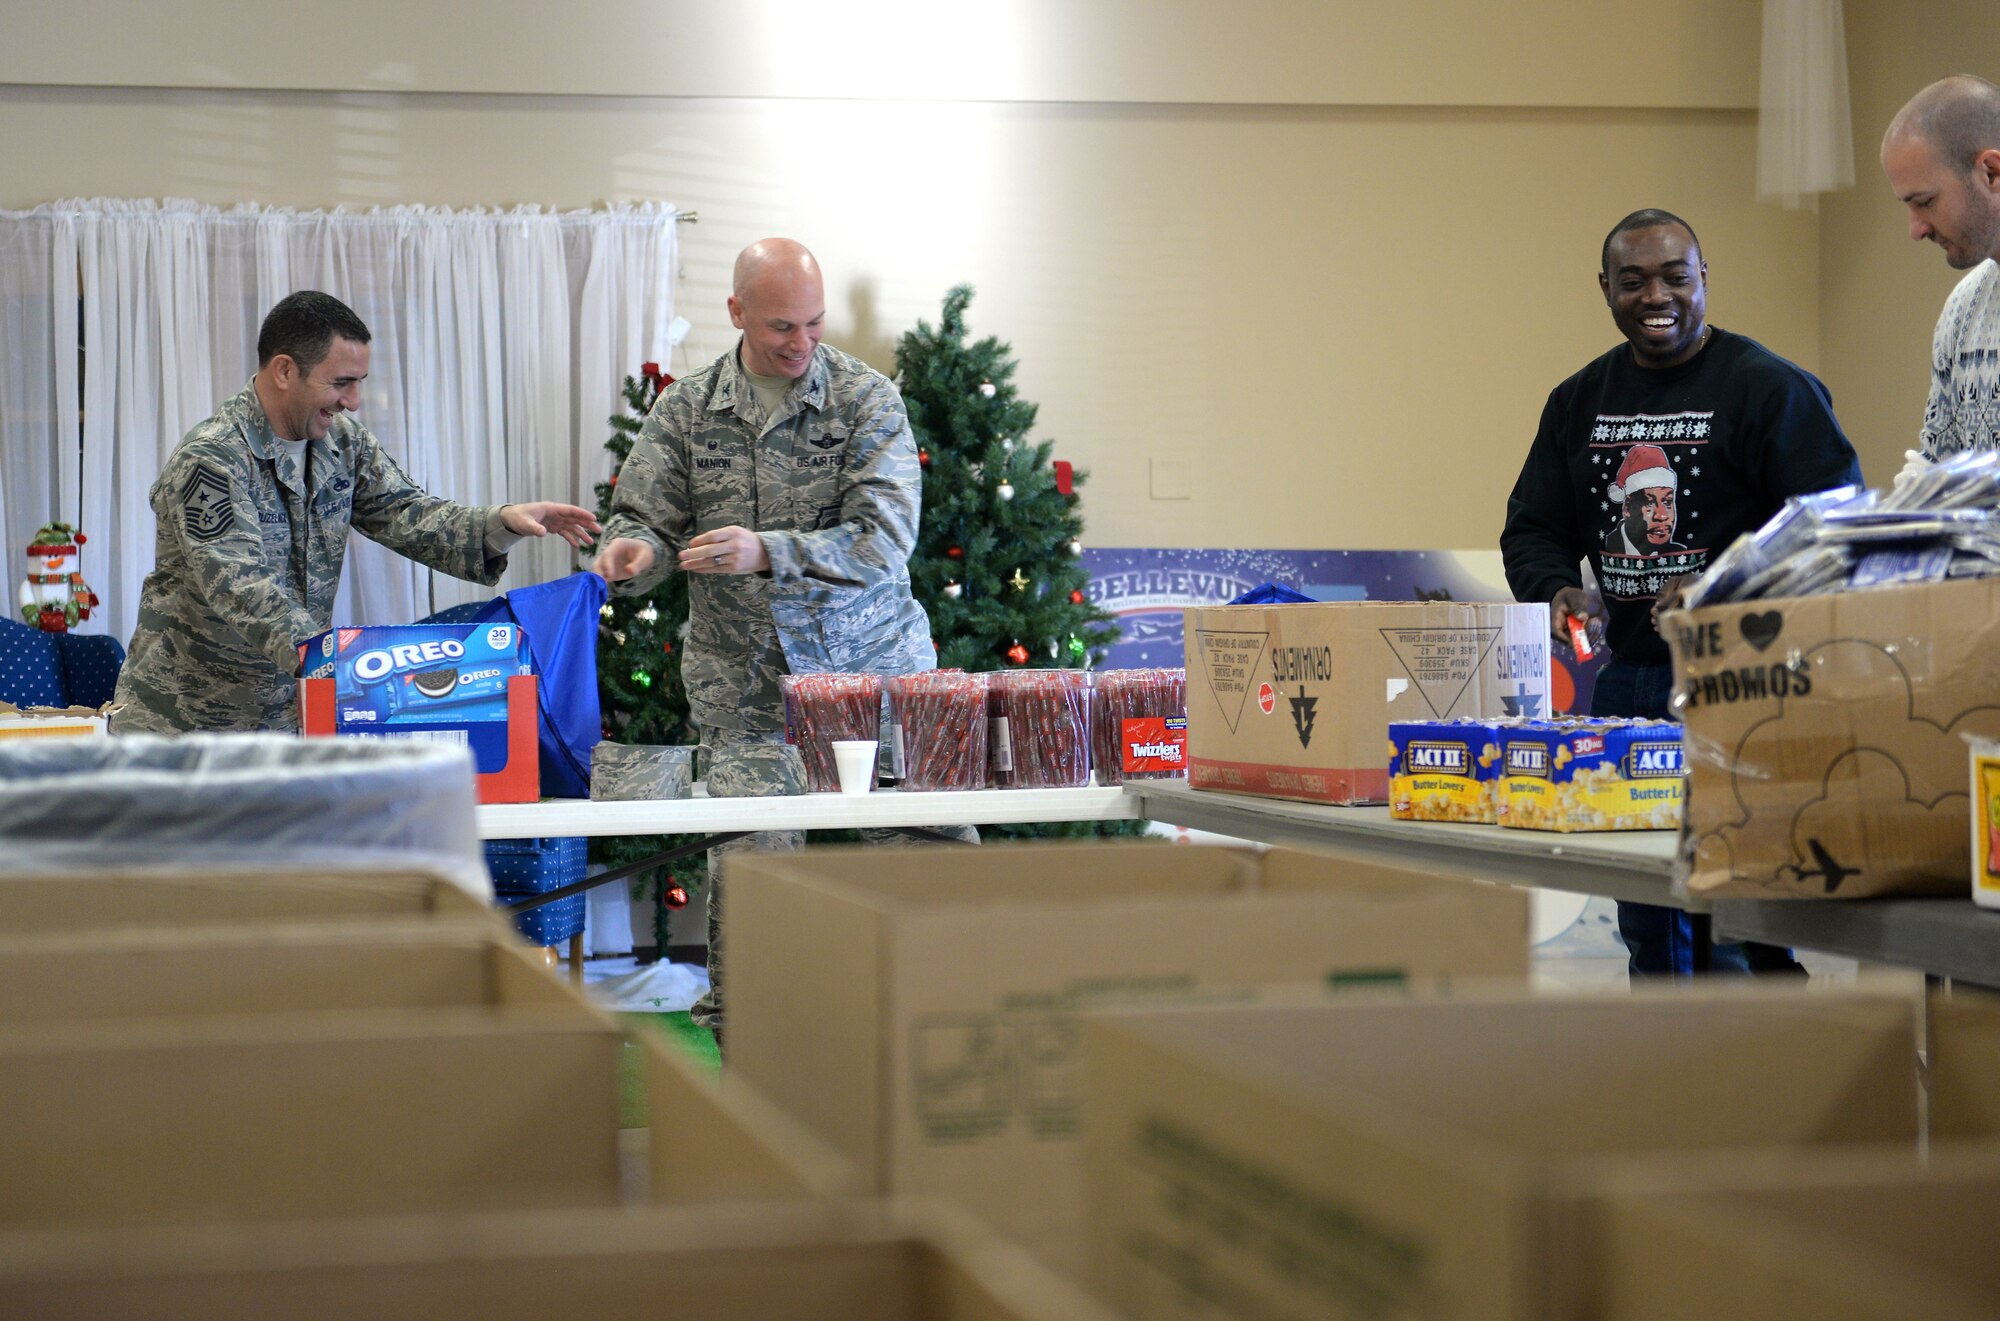 Col. Michael Manion, 55th Wing commander, and 55th Wing Command Chief Master Sgt. Brian Kruzelnick help assemble bags filled with food, treats, and thank you’ s at the Bellevue Volunteer Fire Department hall in Bellevue, Neb. Dec. 5, 2017 as part of “Operation Holiday Cheer.”